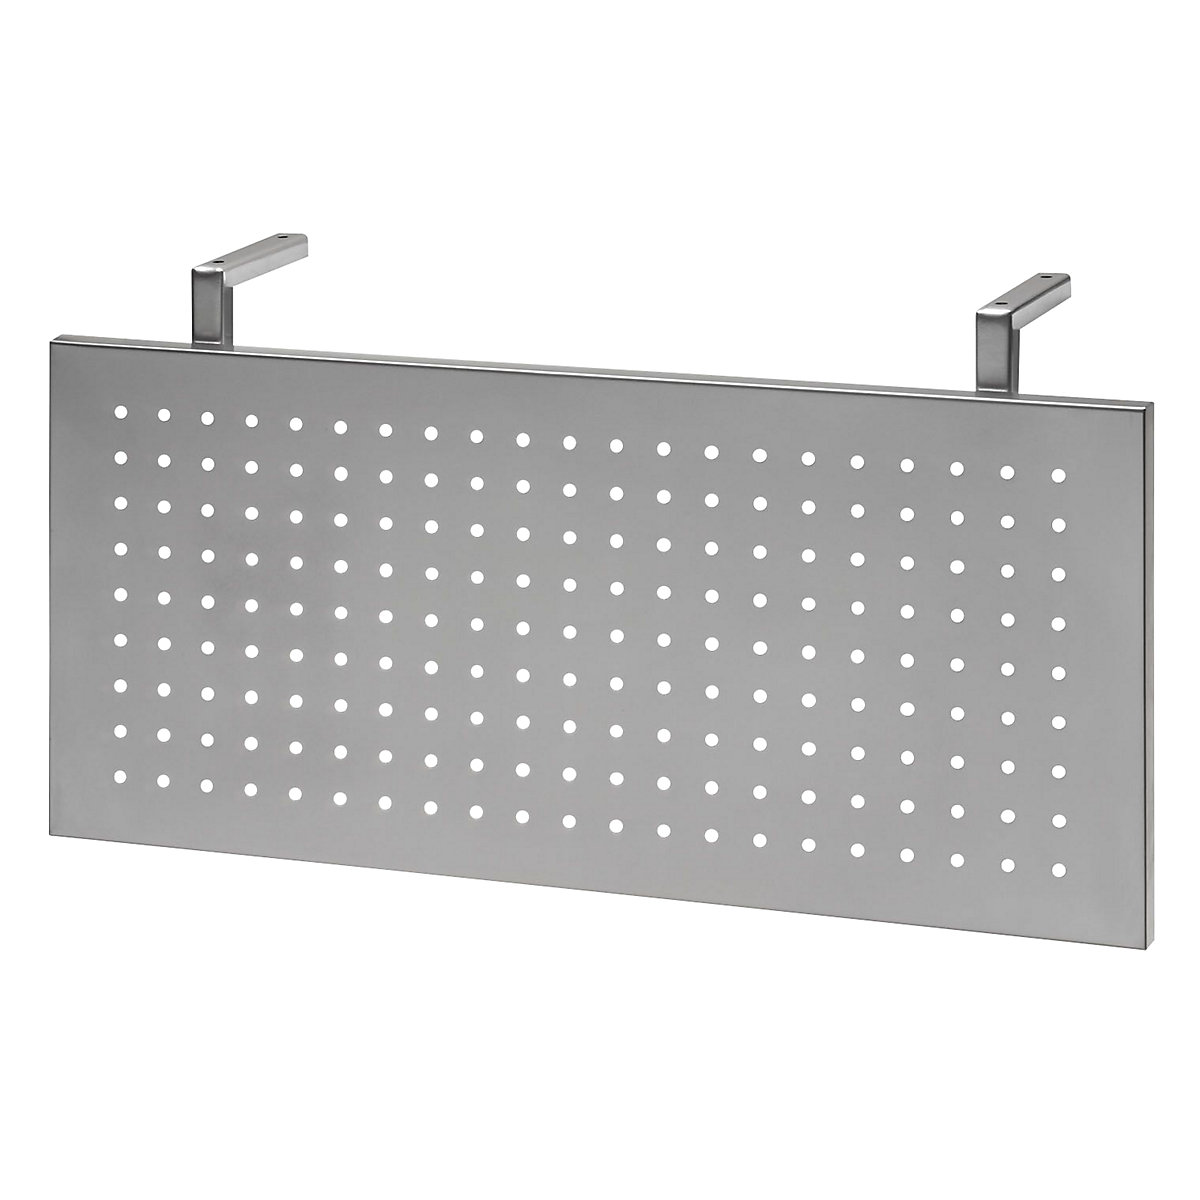 Side panel made of perforated sheet metal